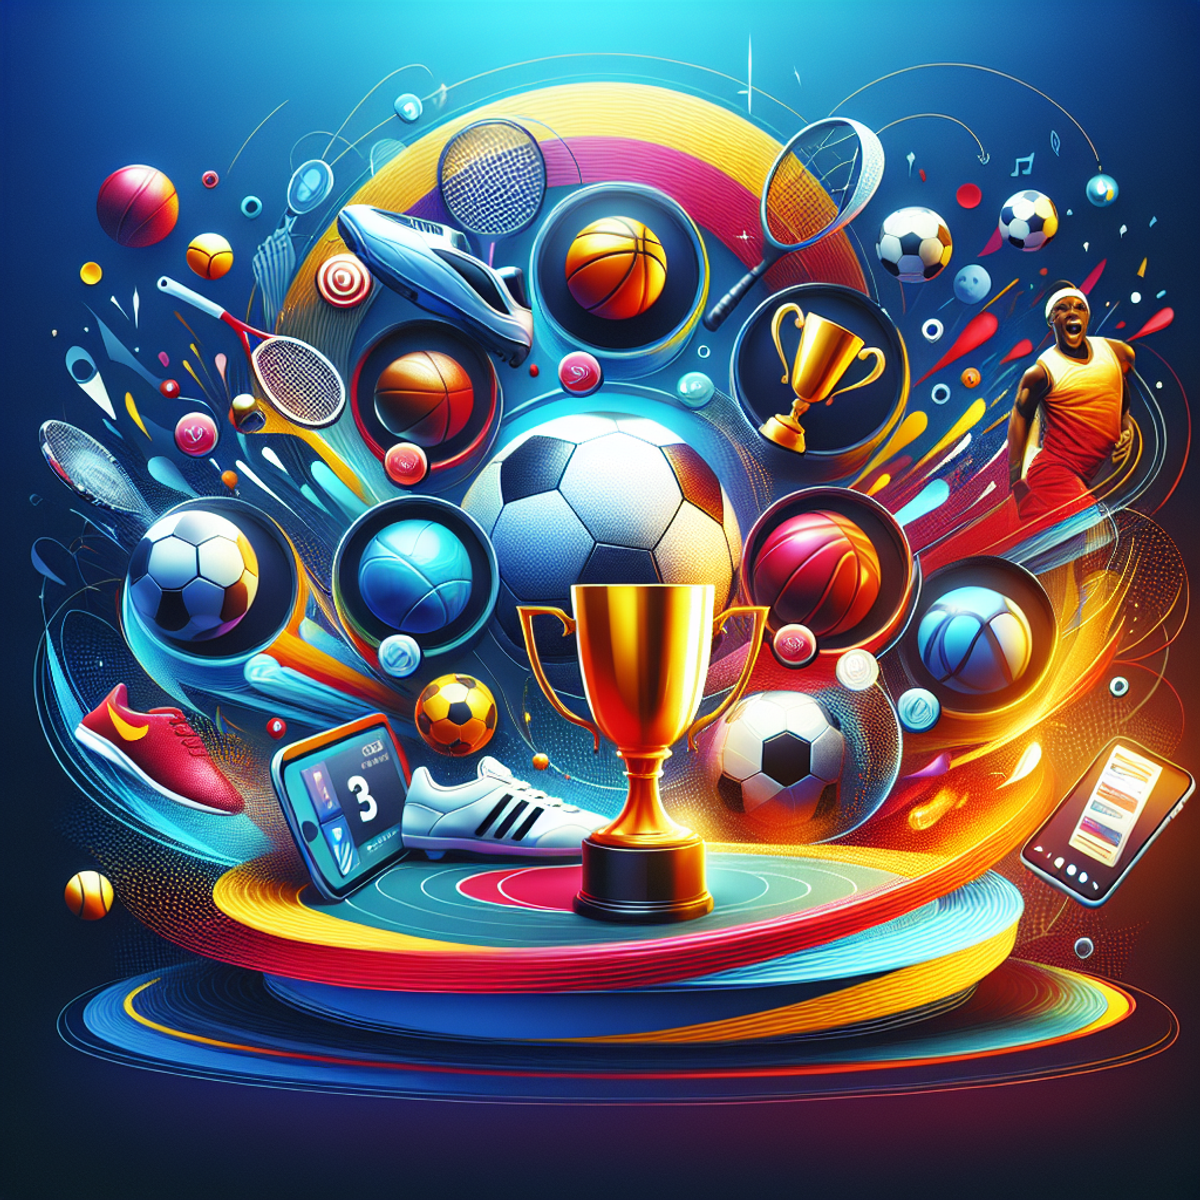 A vibrant, action-packed sports website featuring thumbnails of soccer, basketball, tennis, and running activities. Shiny trophies symbolize triumph and success. Color-coded symbols represent different sections of the website: a soccer ball for football news, a stopwatch for latest results, and a microphone for podcasts and interviews. The background has a sleek design with abstract shapes, rich colors, and smooth transitions.